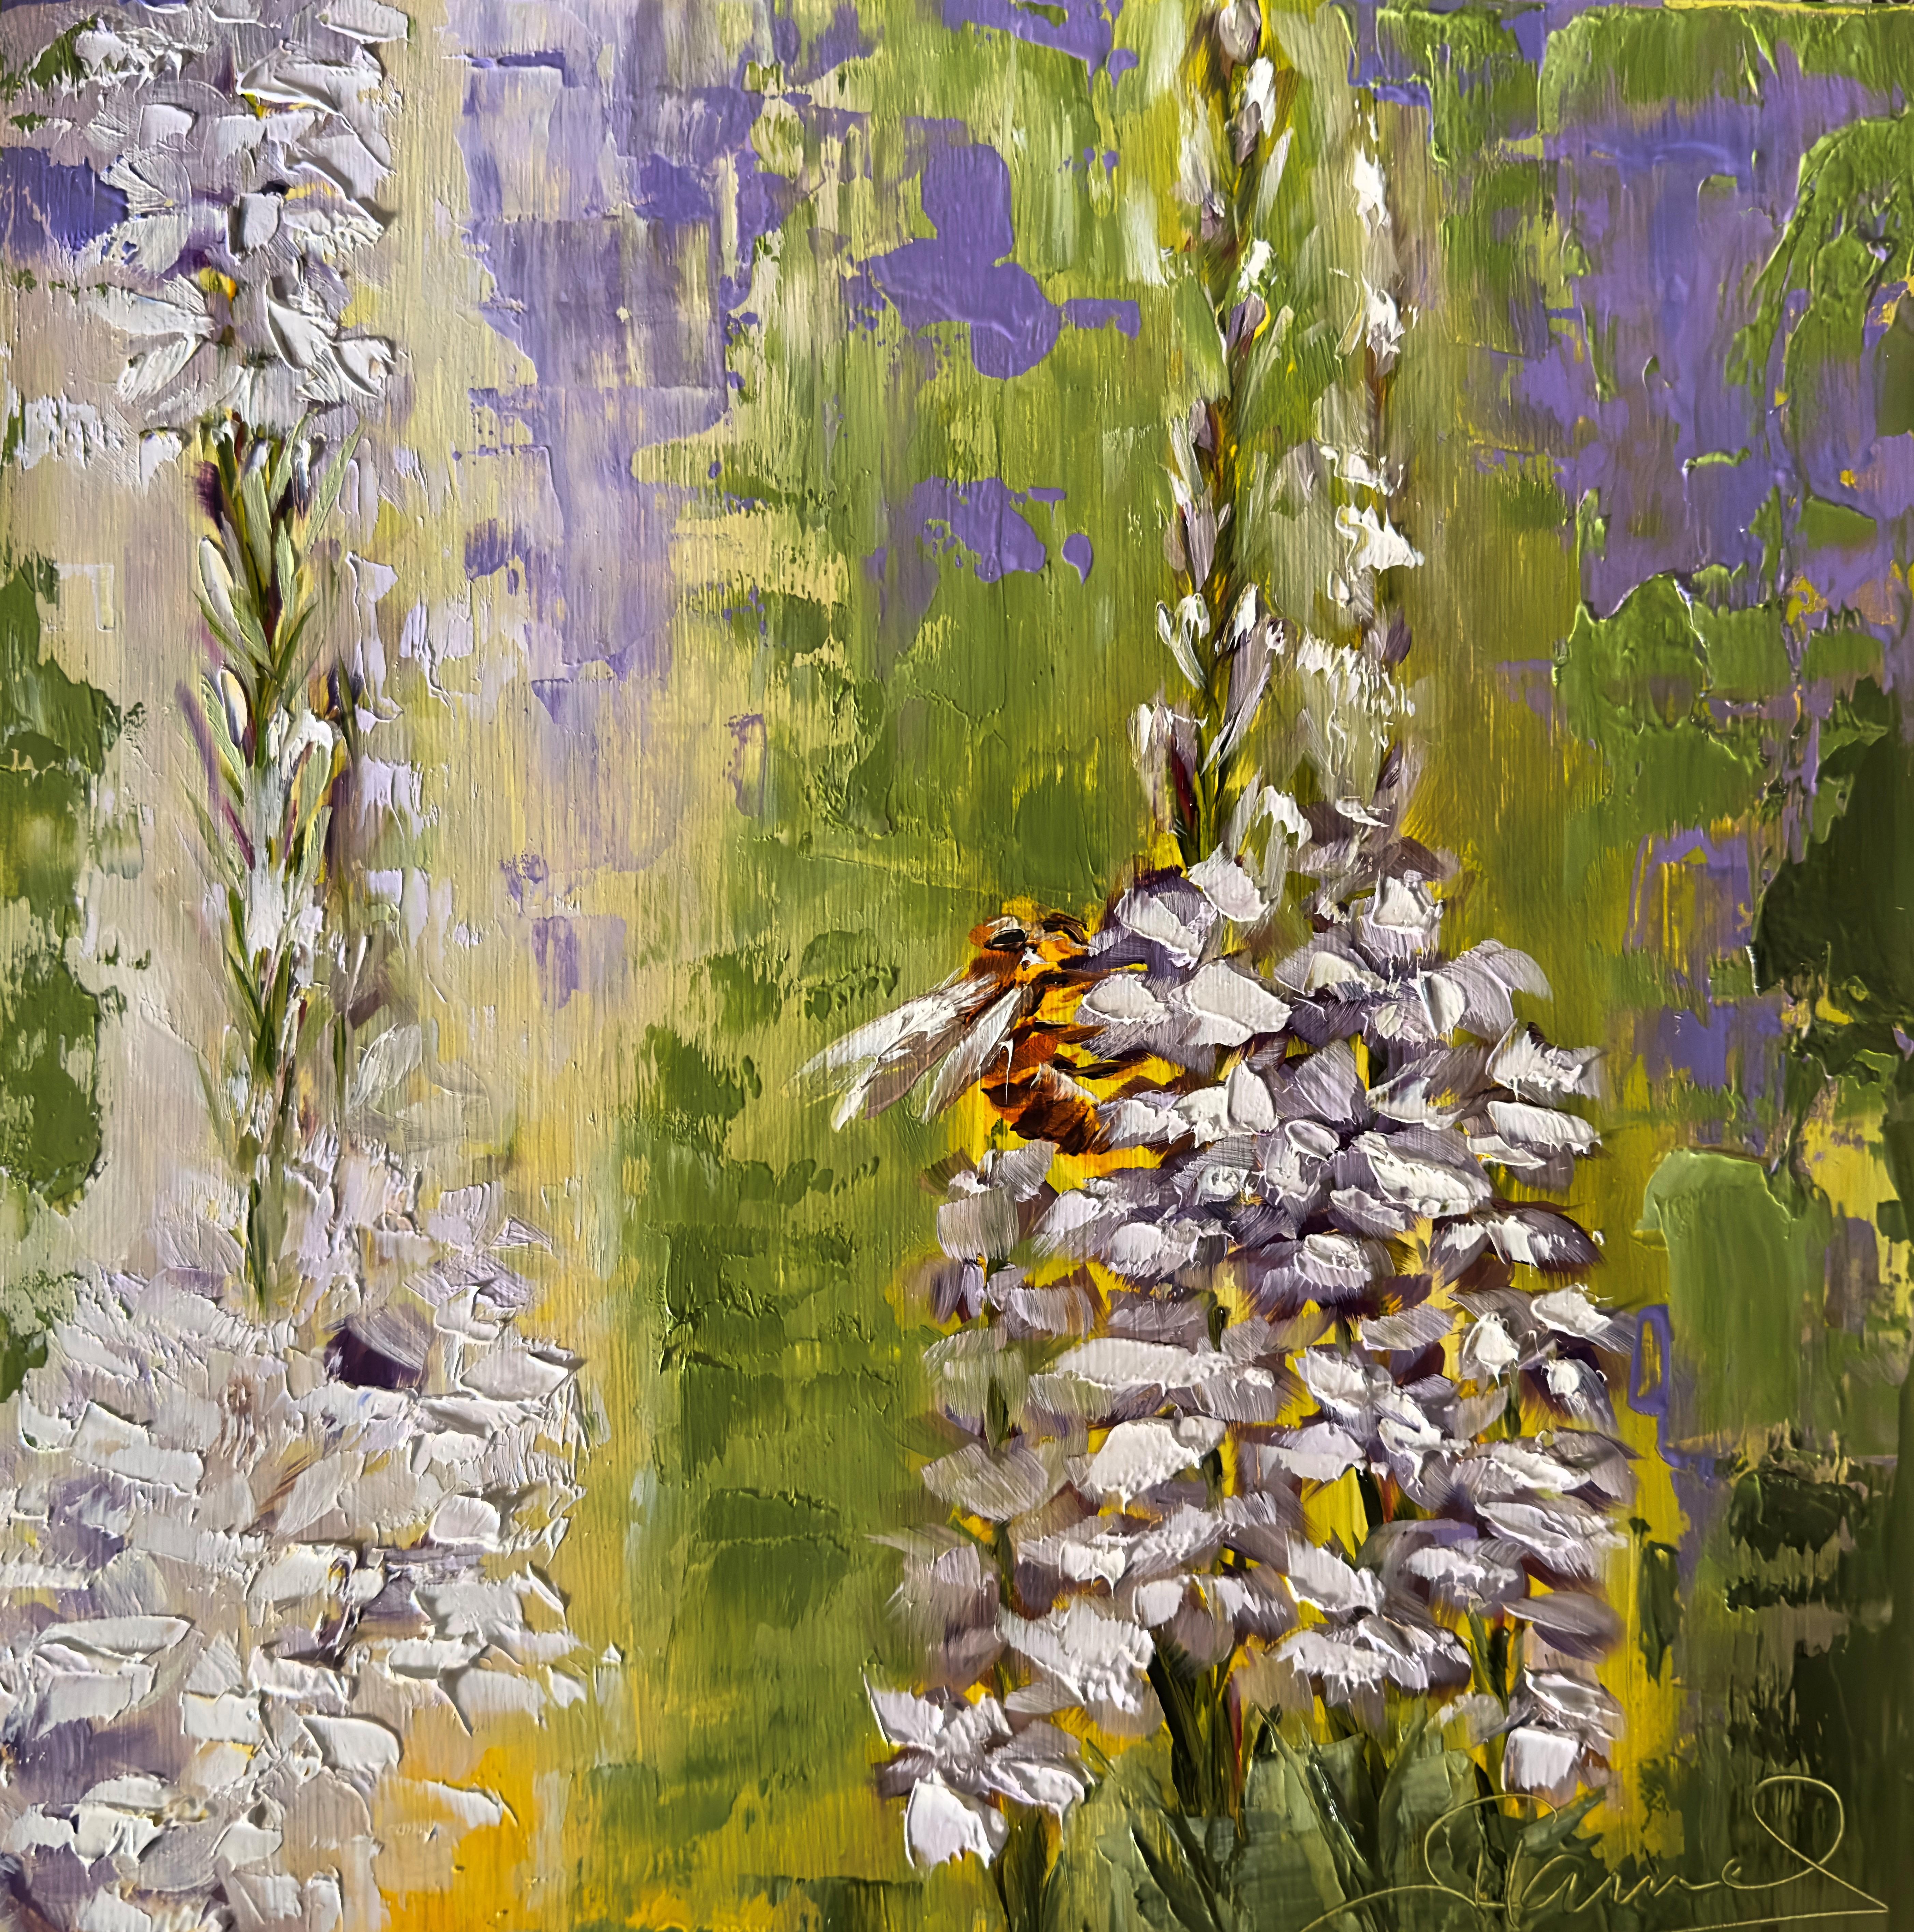 Genevieve Hamel
Biz Biz Bees
Oil on Wood Panel
Year: 2023
Size: 12x12x1.5in
Signed and inscribed by hand
COA provided
Ref.: 924802-1692

Tags: Flower, Landscape, Impressionist style, Glazes